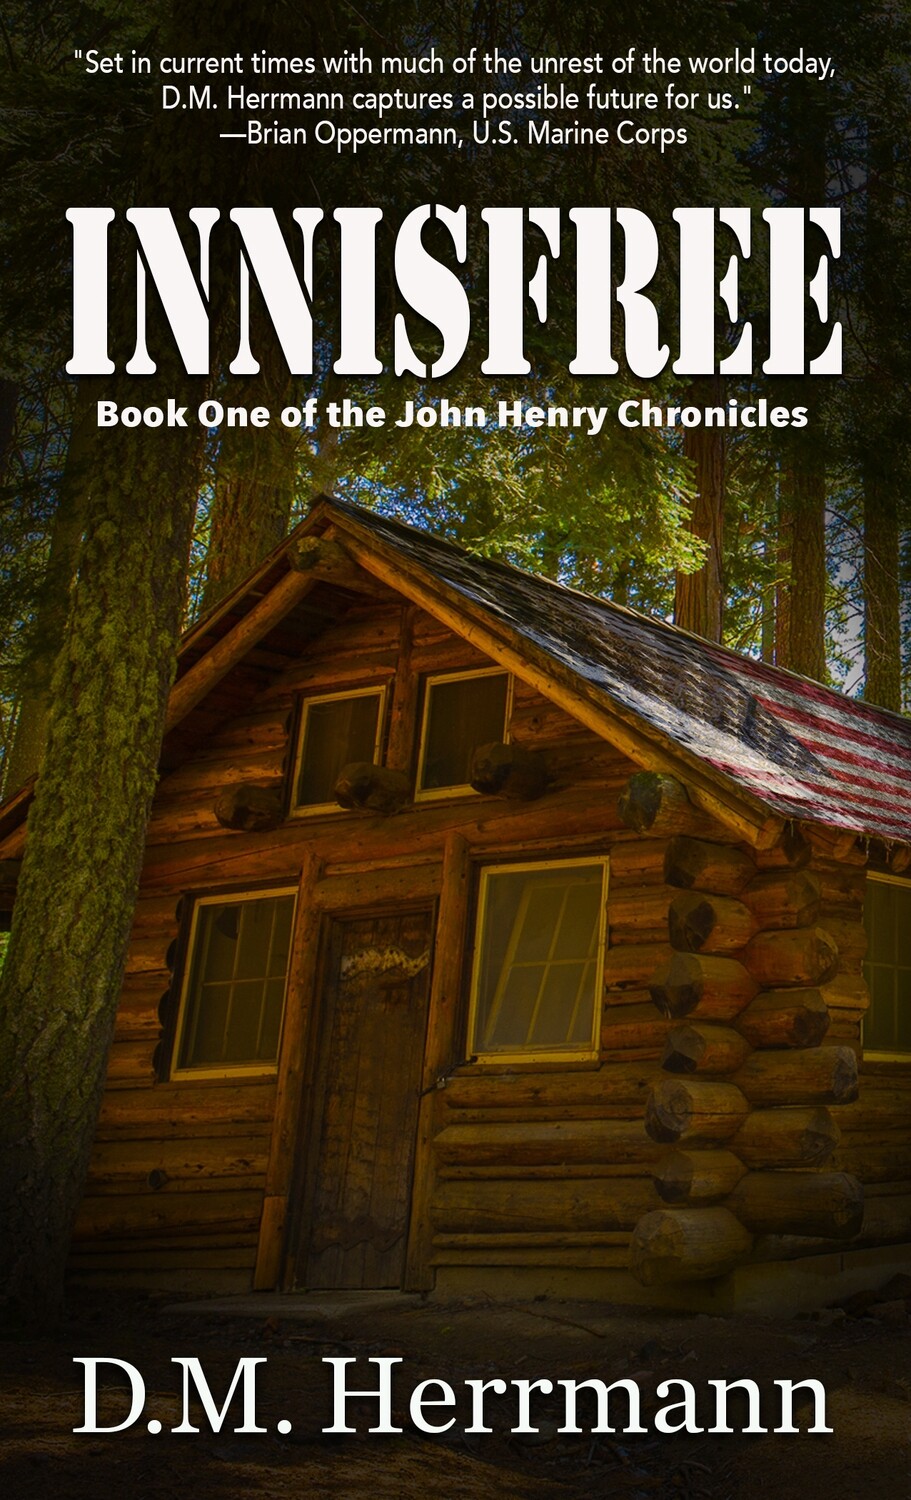 Innisfree: Book One of the John Henry Chronicles by D. M. Herrmann